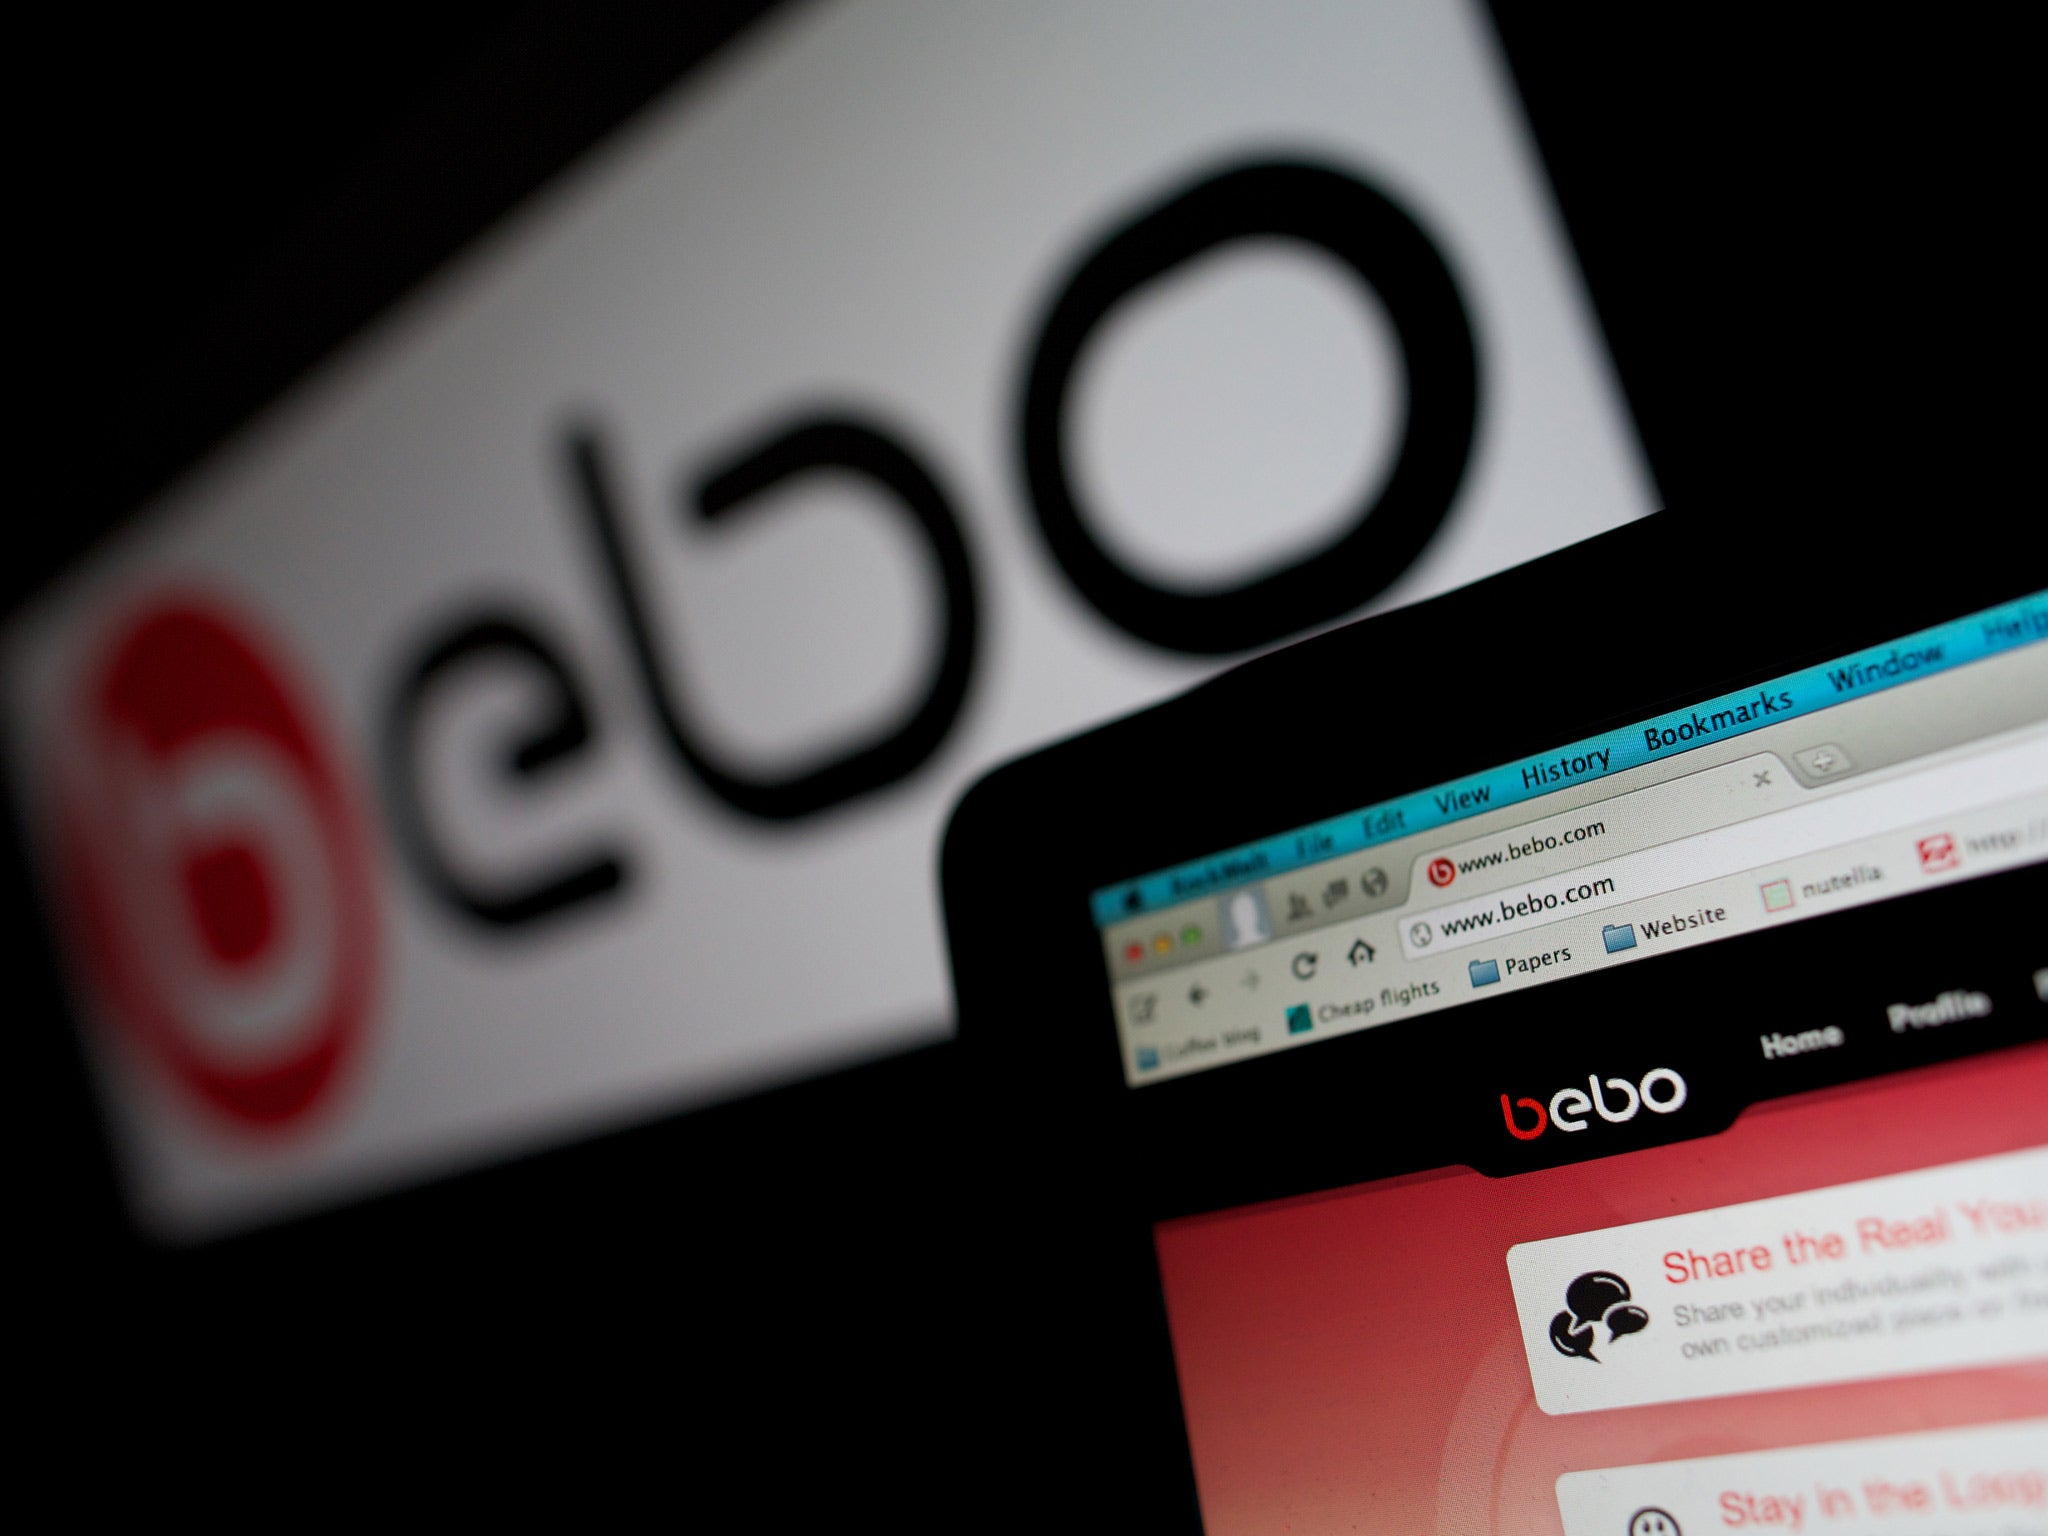 The original Bebo site, which AOL bought in 2008 and sold back again, for much less, last year